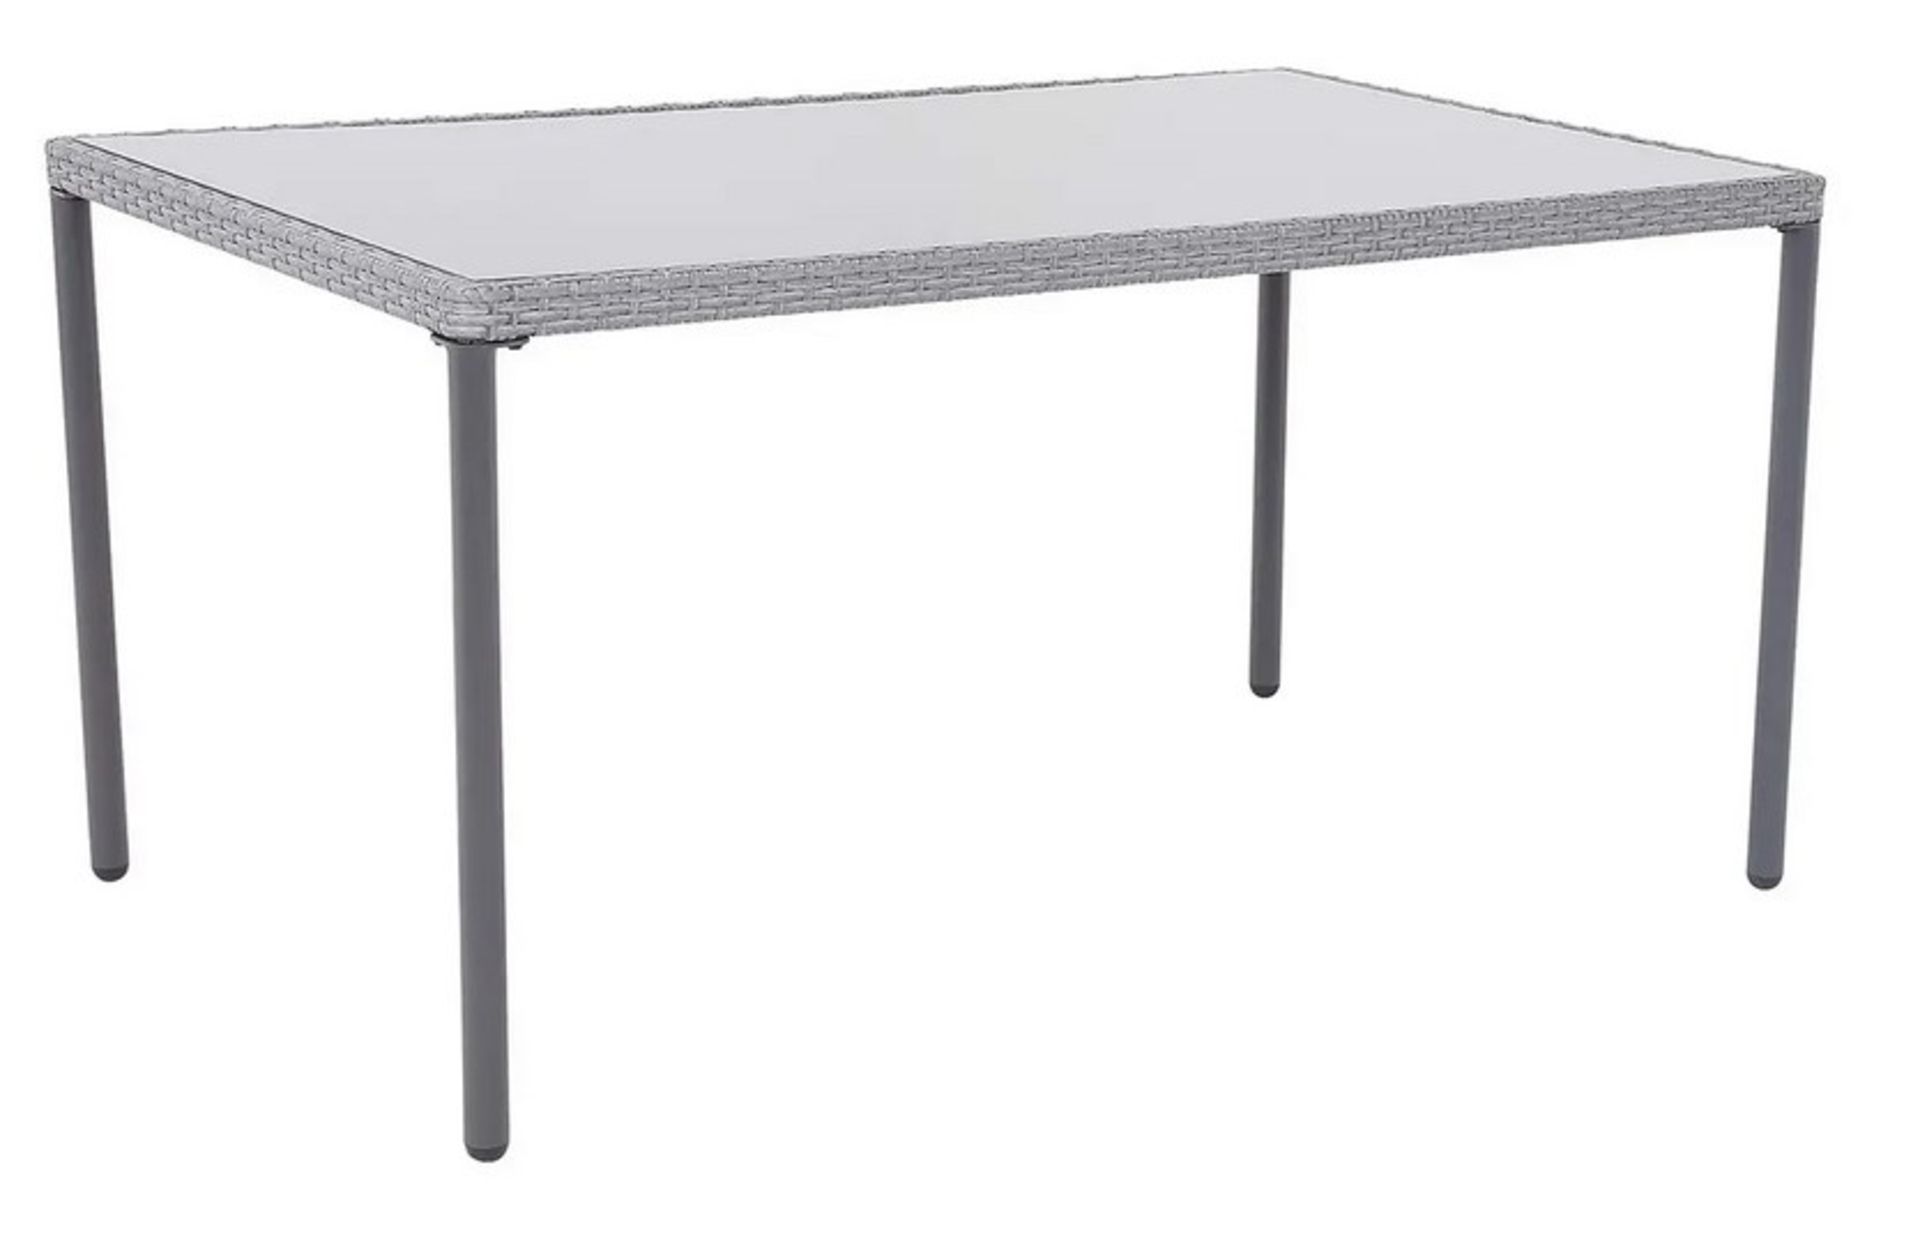 (31/P) RRP £150. Bambrick Rectangular Table. Rattan Effect Edges. Removable Table Legs For Easy S...